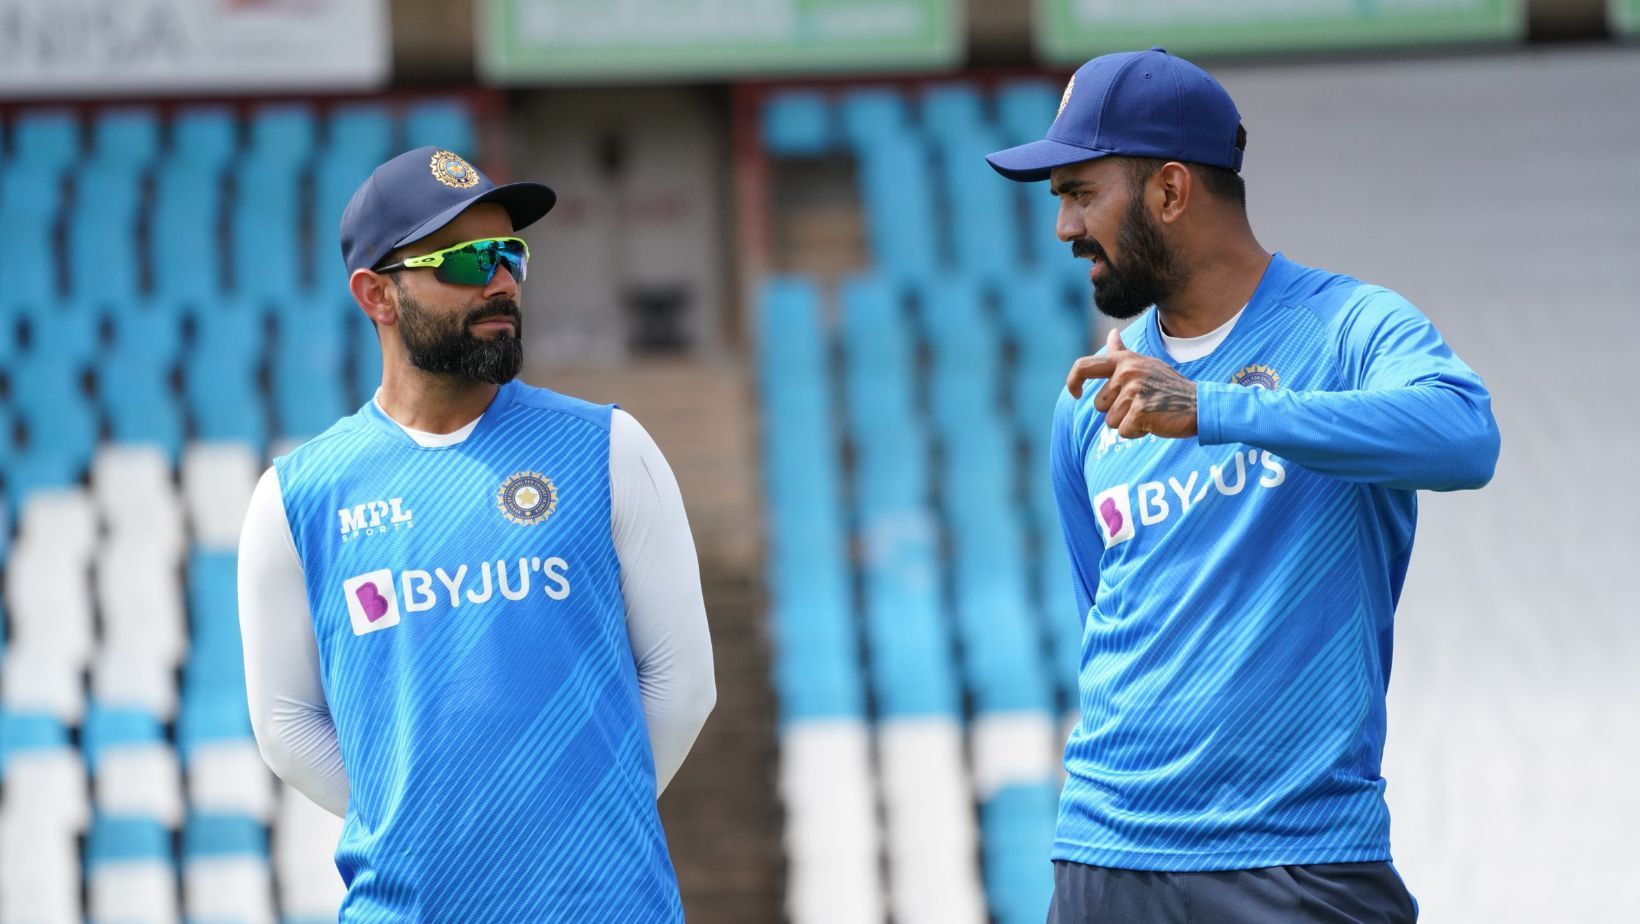 What playing 11 will Virat Kohli and KL Rahul come up with on Sunday? (PC: BCCI)